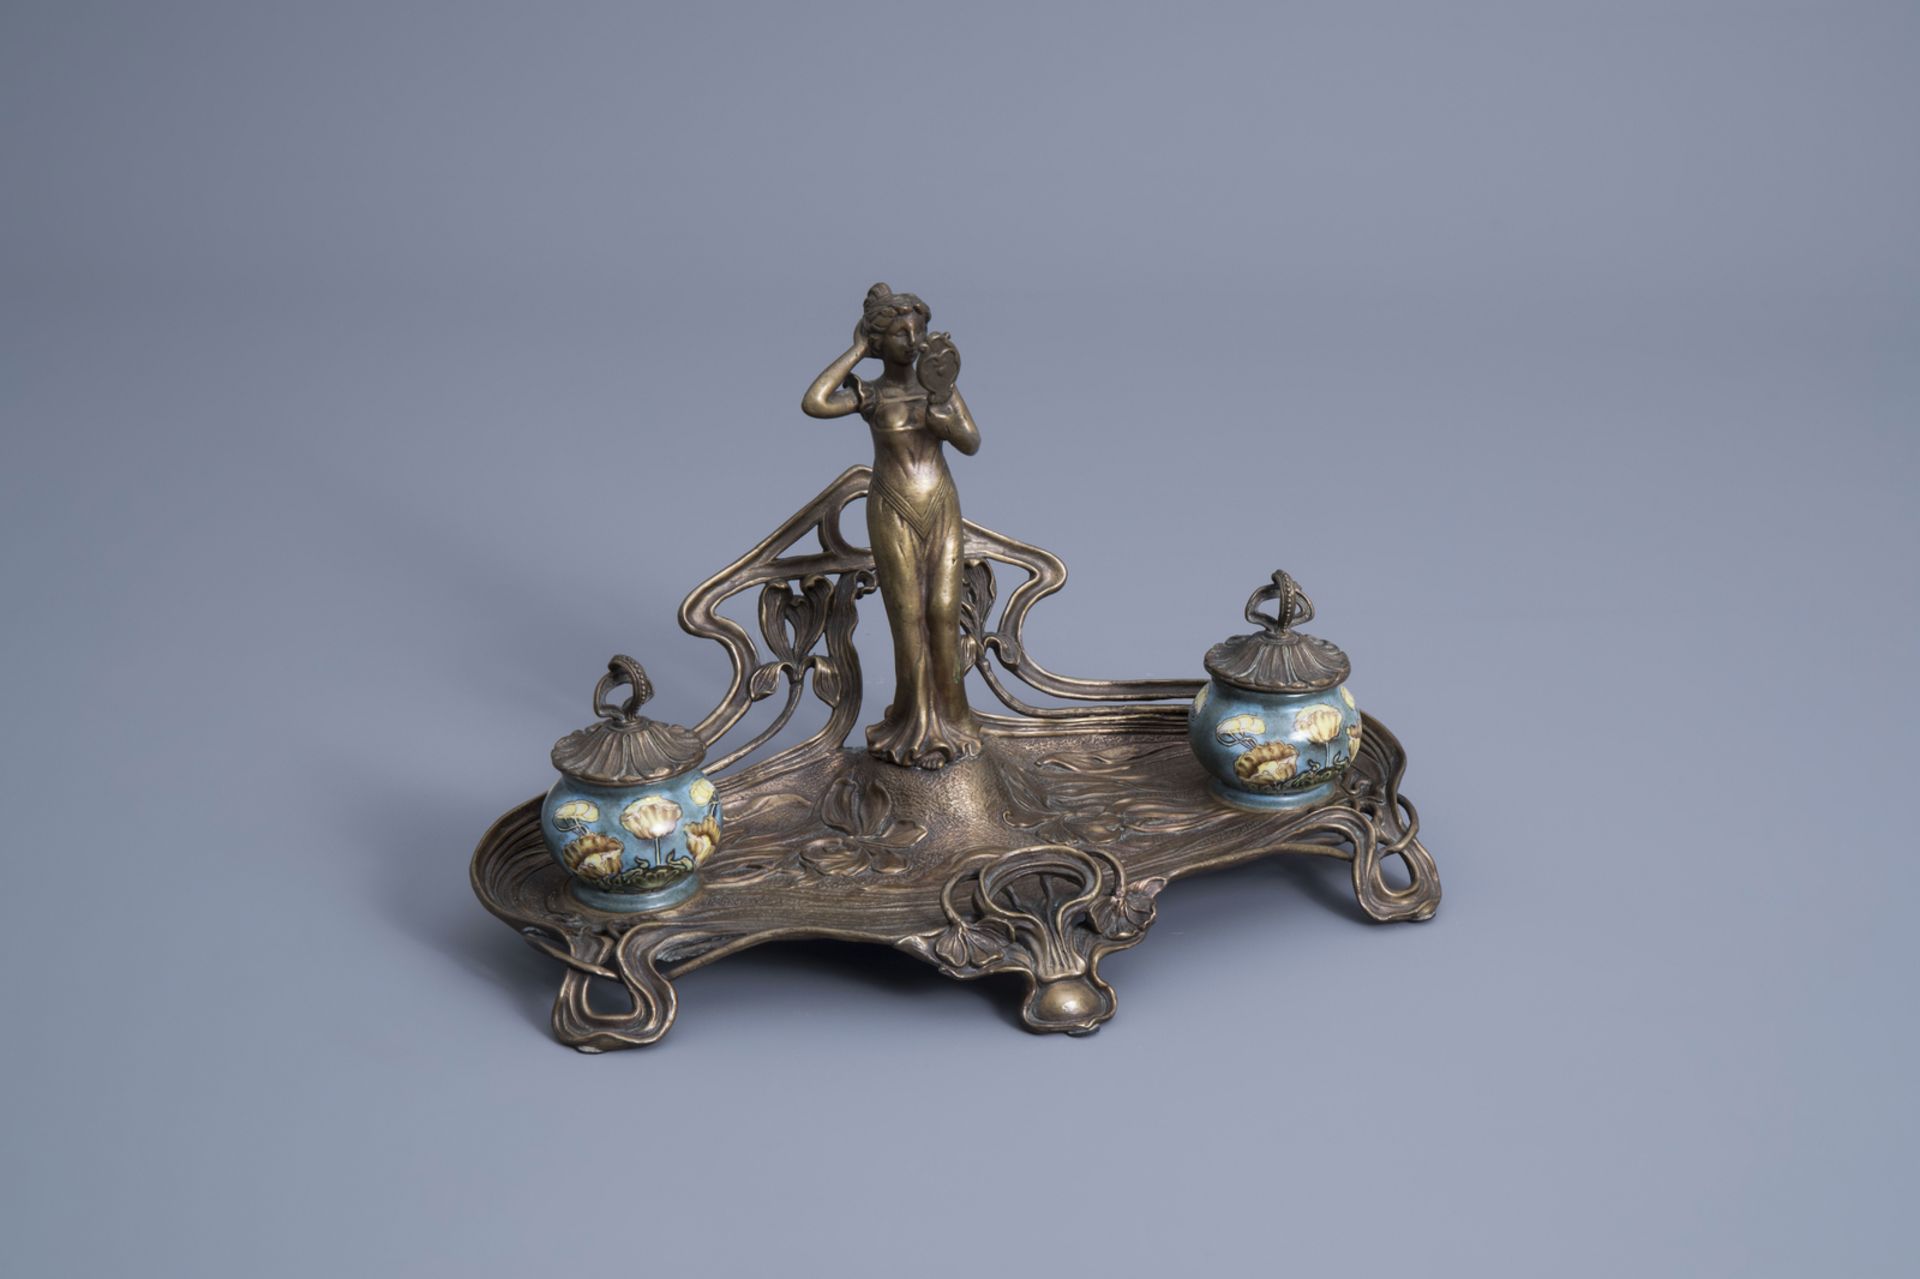 A brass Art Nouveau style ink well with floral design and a lady looking in the mirror, 20th C.